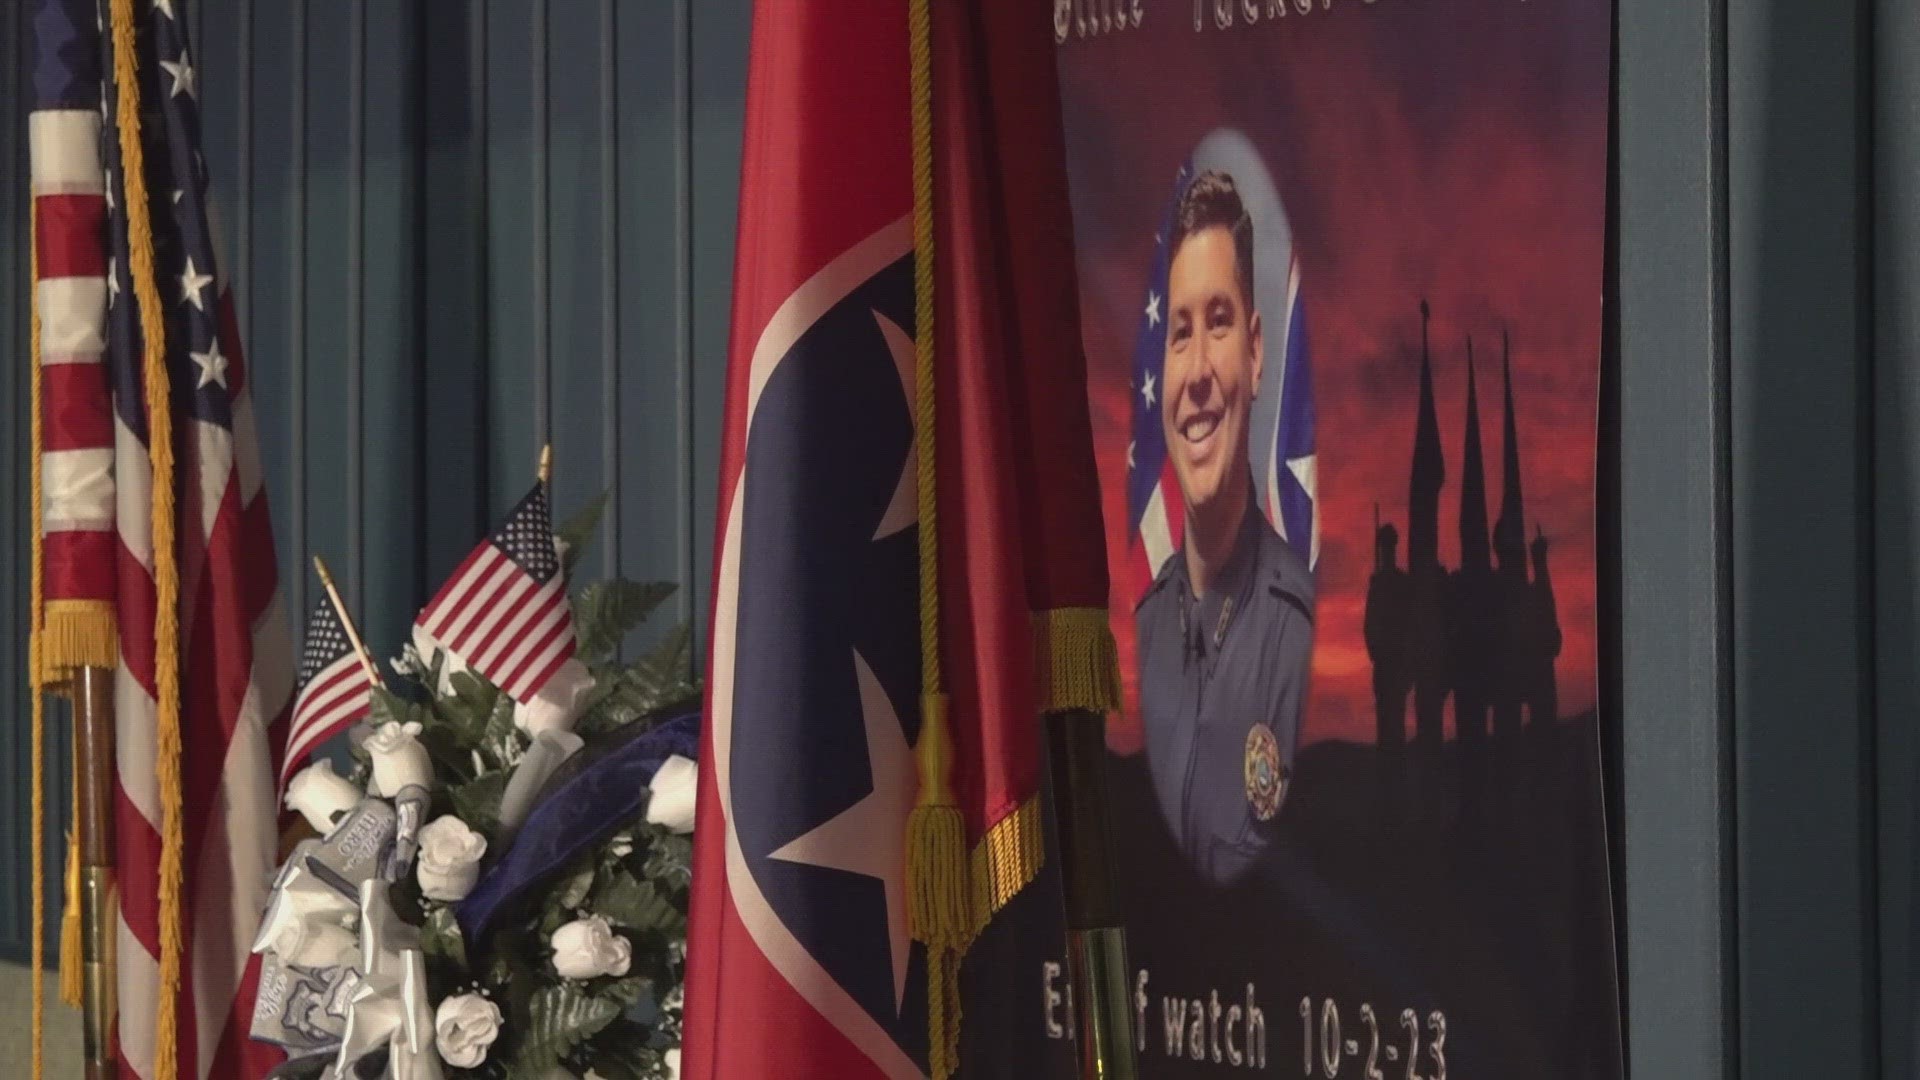 A memorial was made for Deputy Tucker Blakely outside city hall in Maynardville, where his brother serves as mayor.